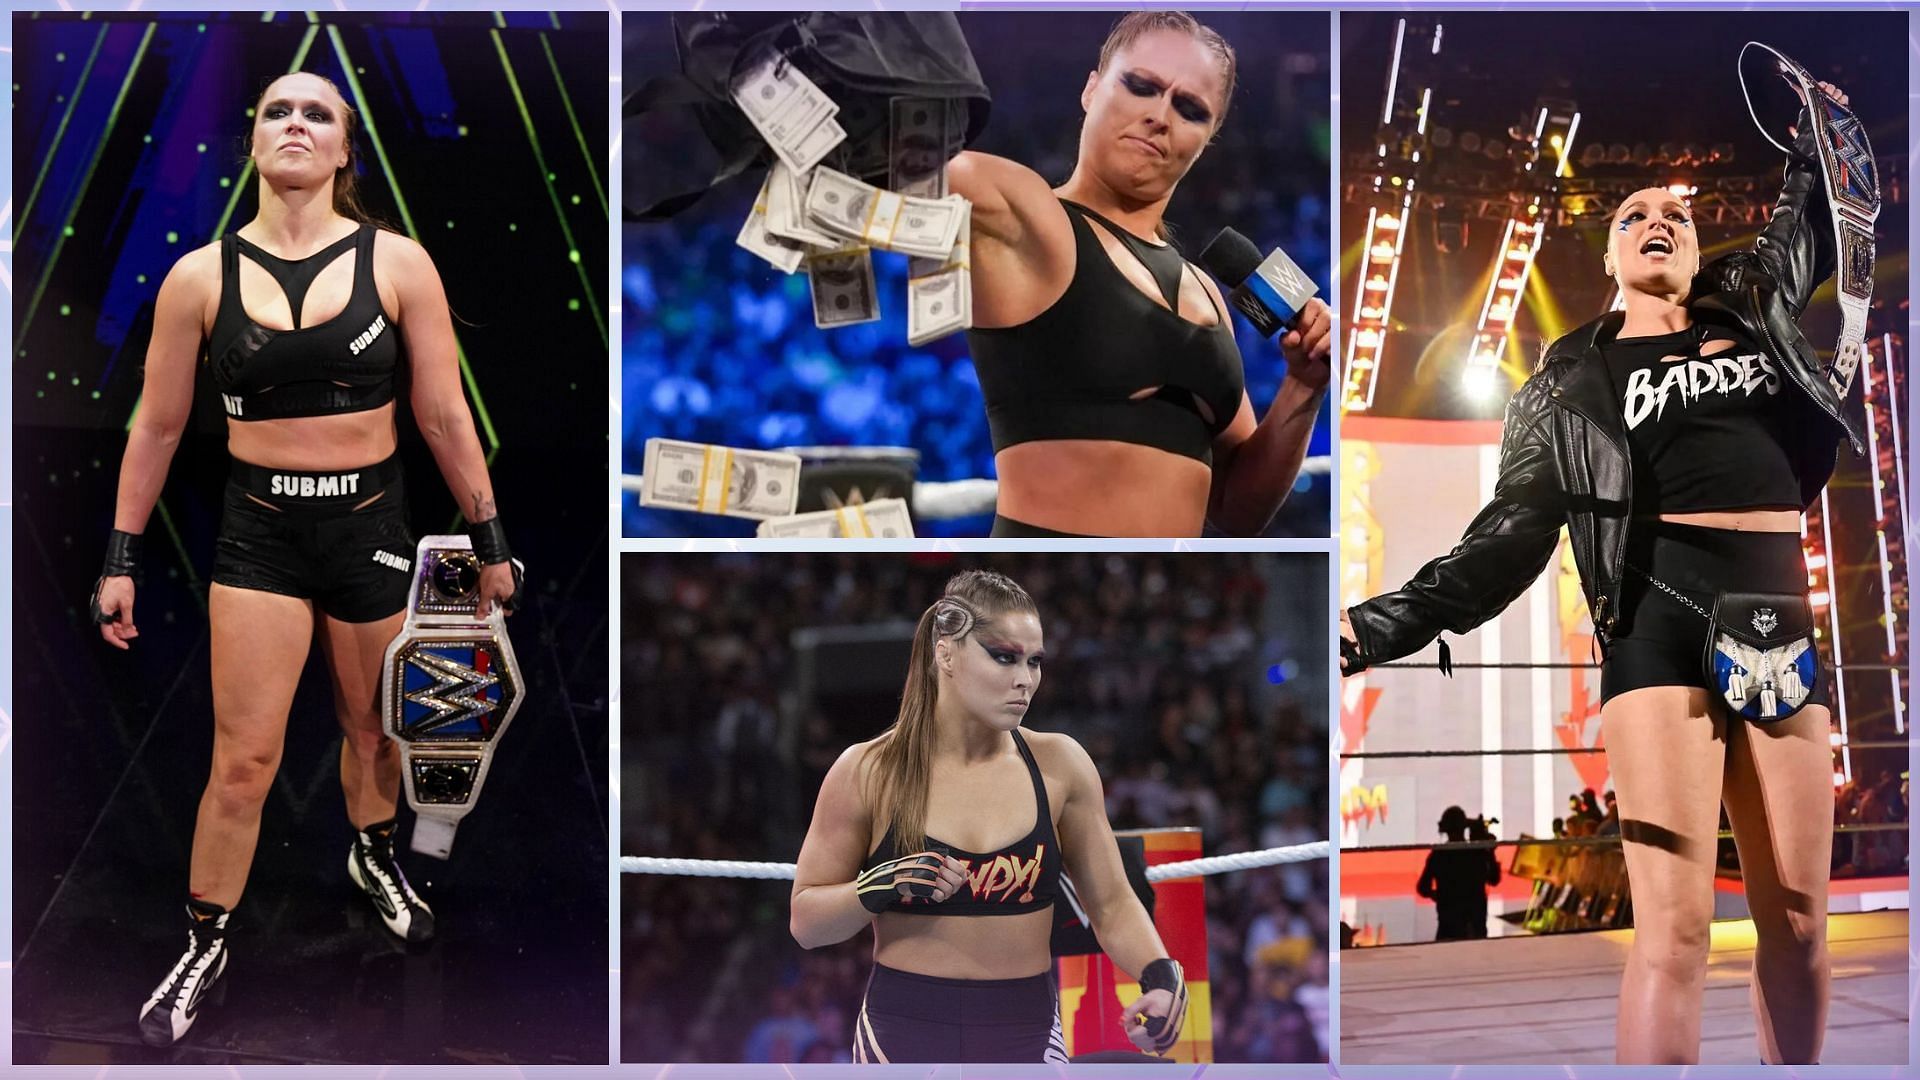 Ronda Rousey is the current WWE SmackDown Women